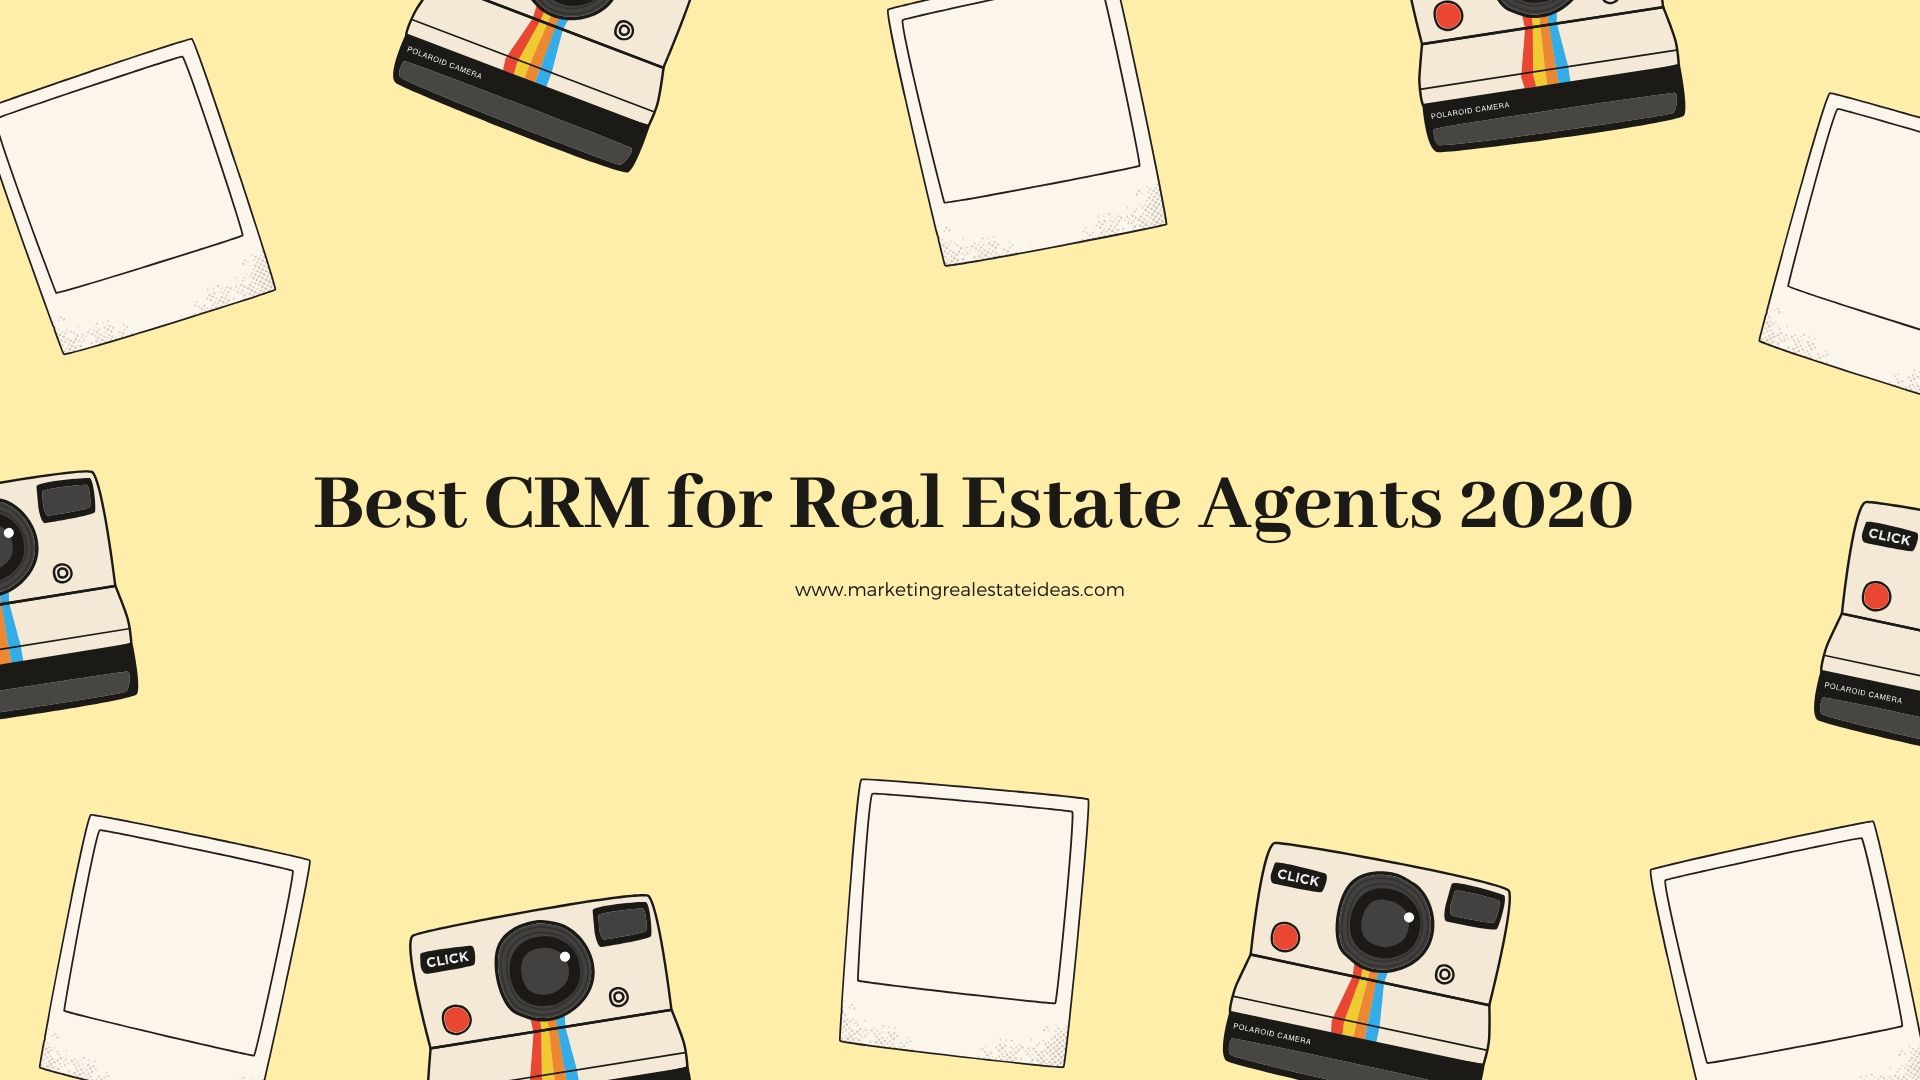 BEST CRM FOR COMMERCIAL REAL ESTATE BROKERS